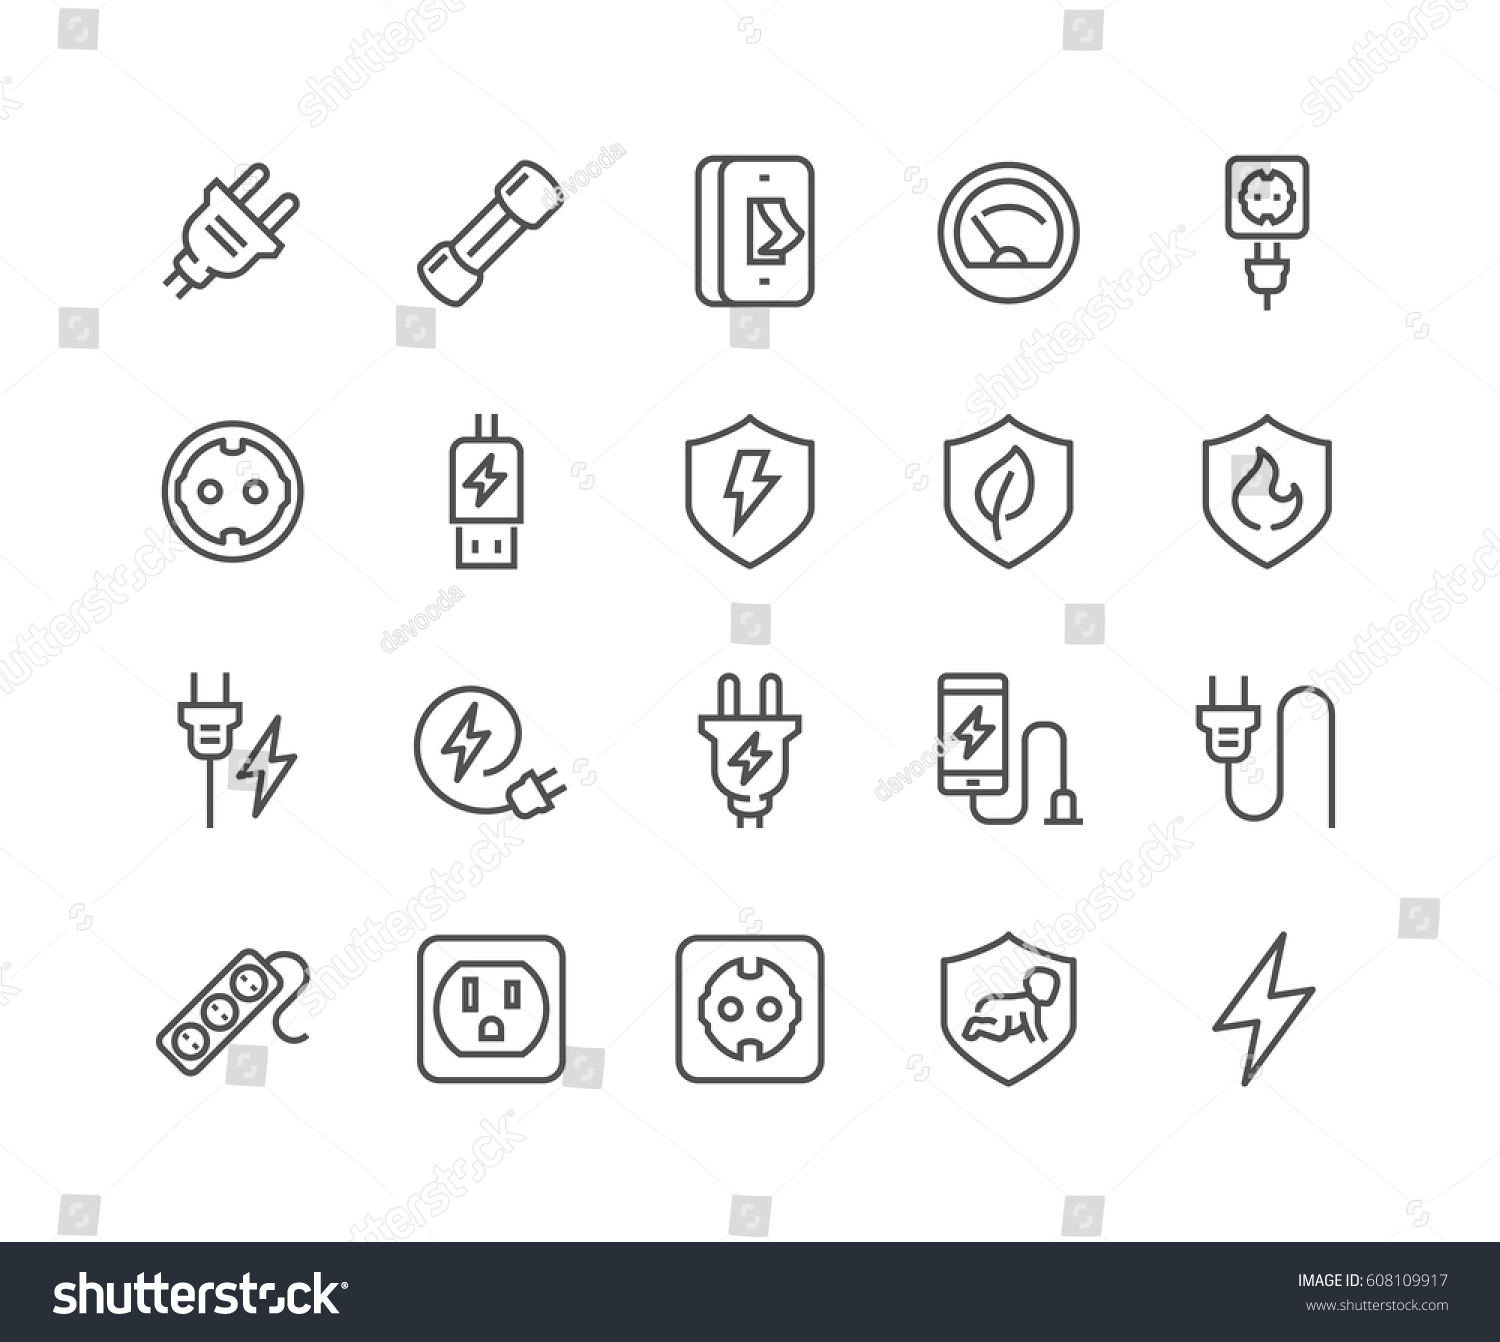 Simple Set of Surge Protector Related Vector Line Icons. 
Contains such Icons as American/European Socket, USB Charge, Child Protection and more.
Editable Stroke. 48x48 Pixel Perfect. #608109917